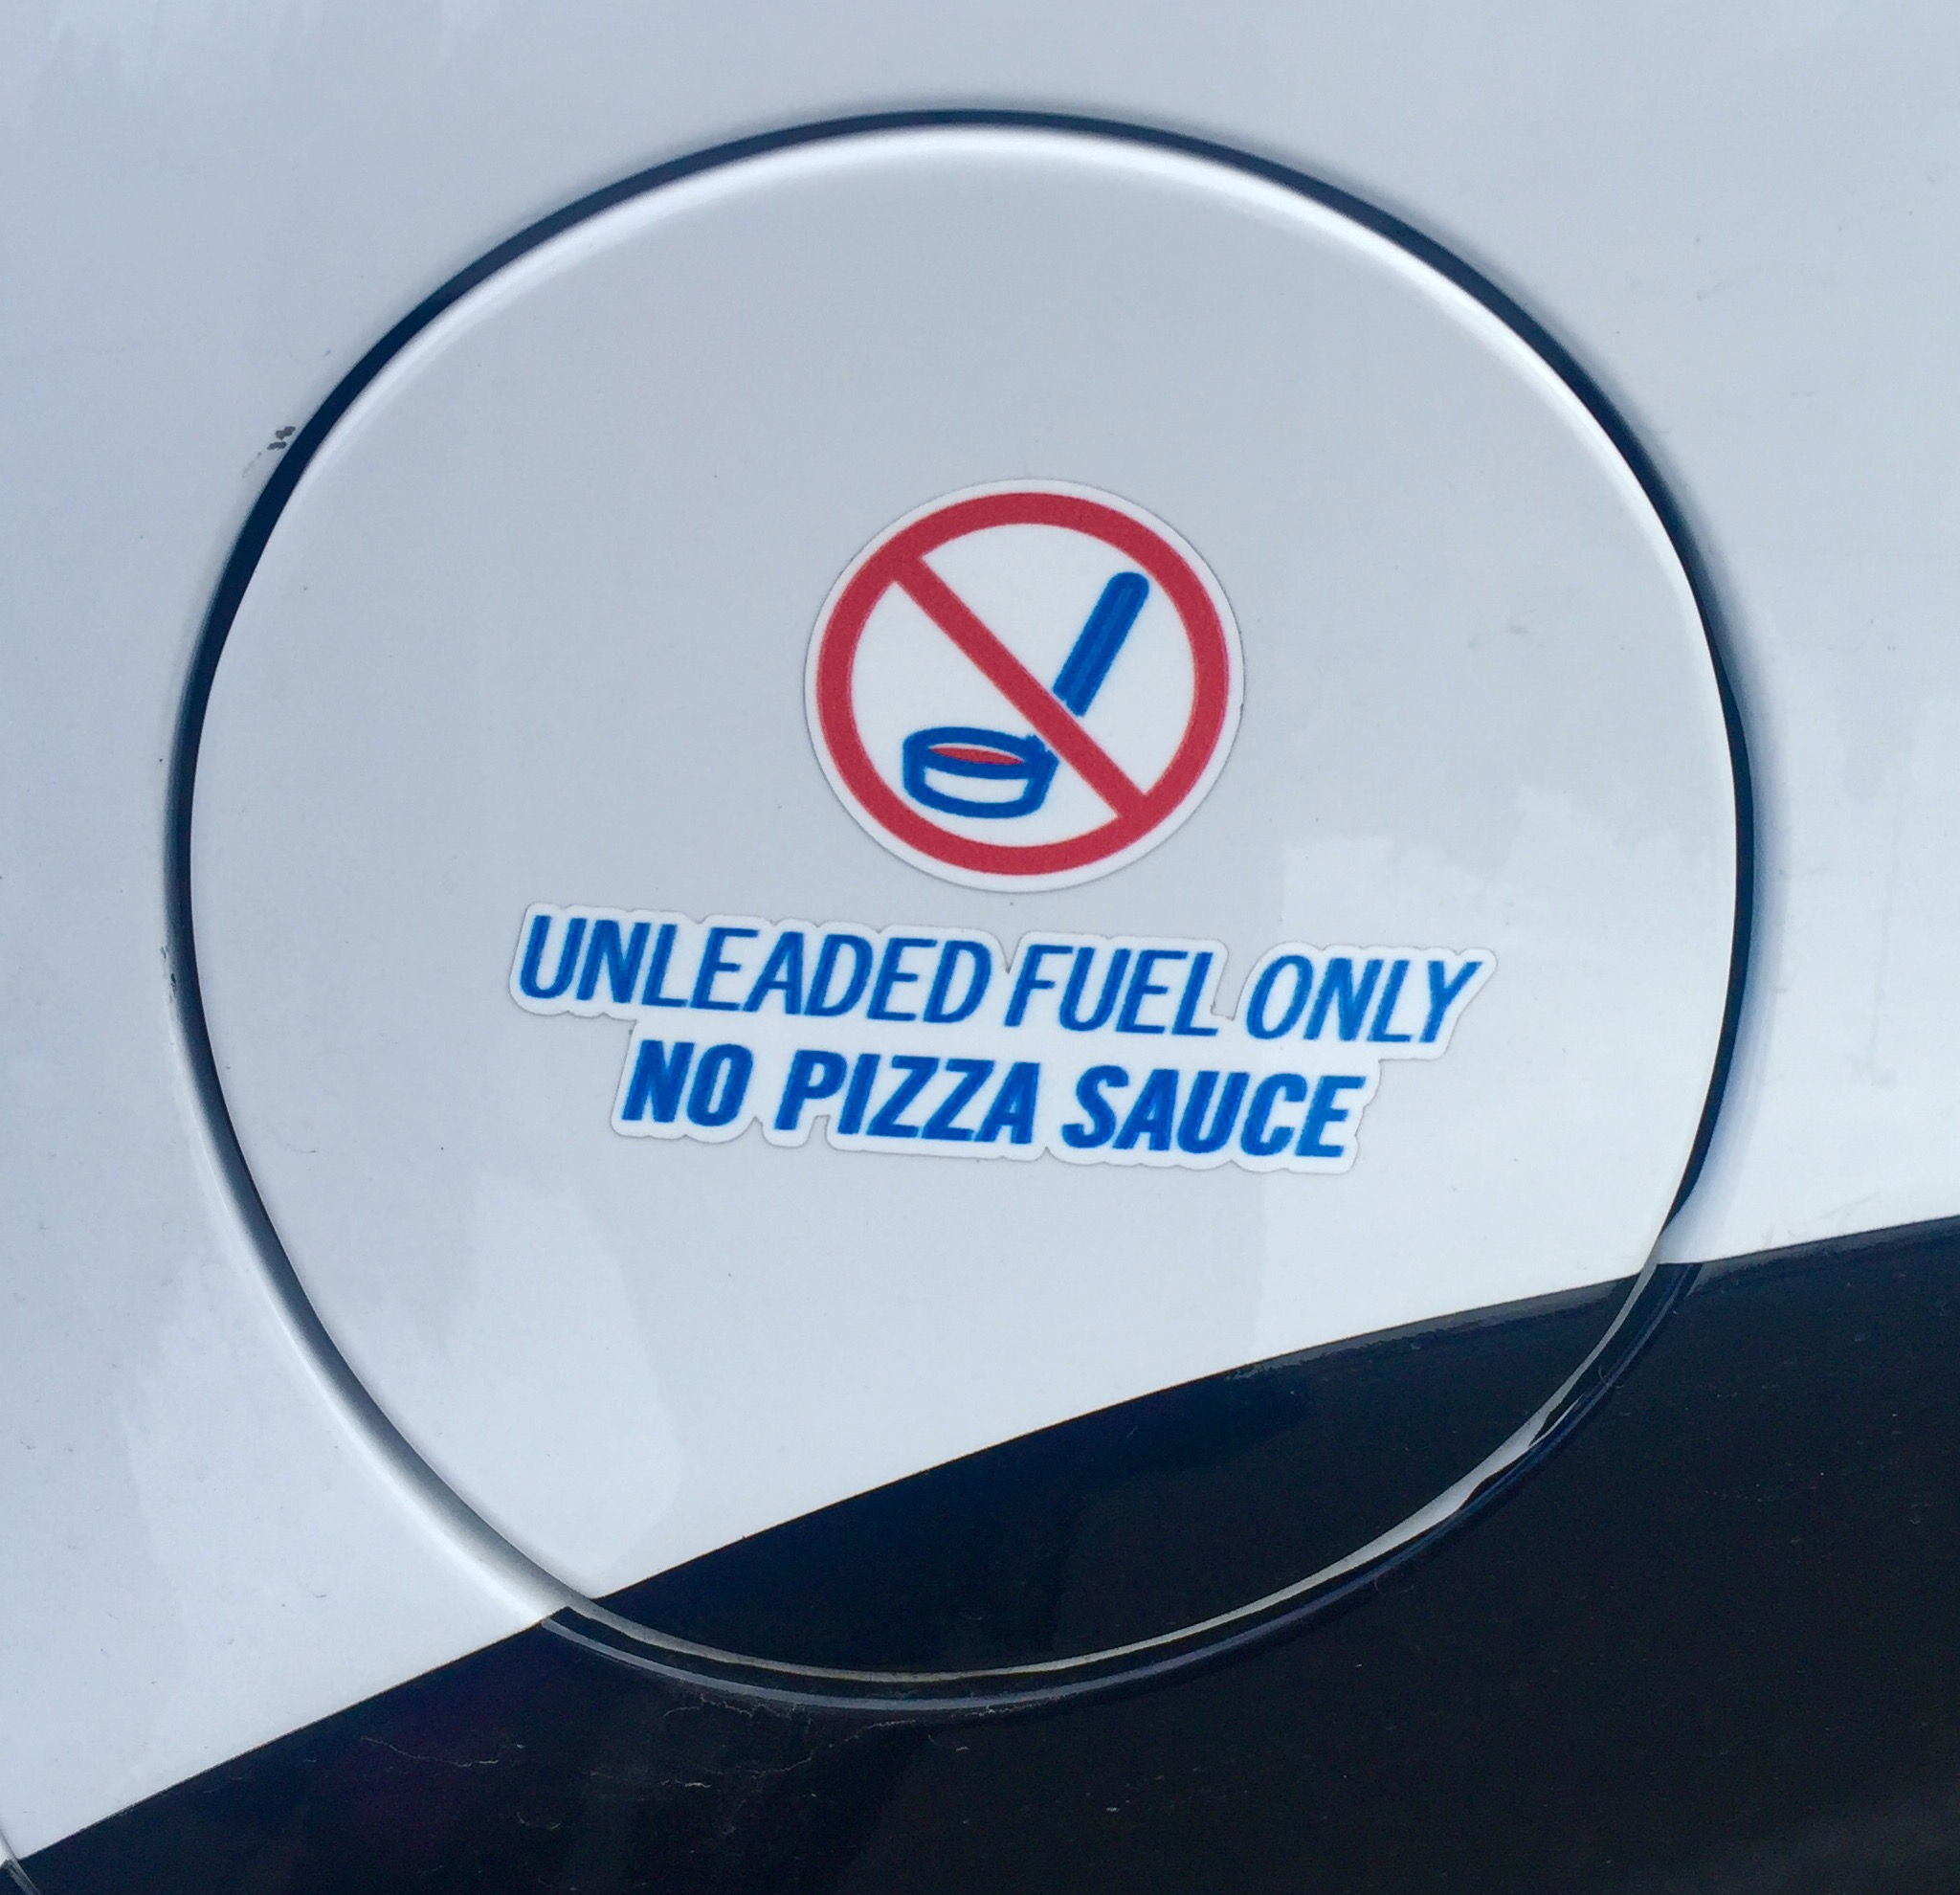 Saucy new pizzamobile delivers pies around Snohomish County